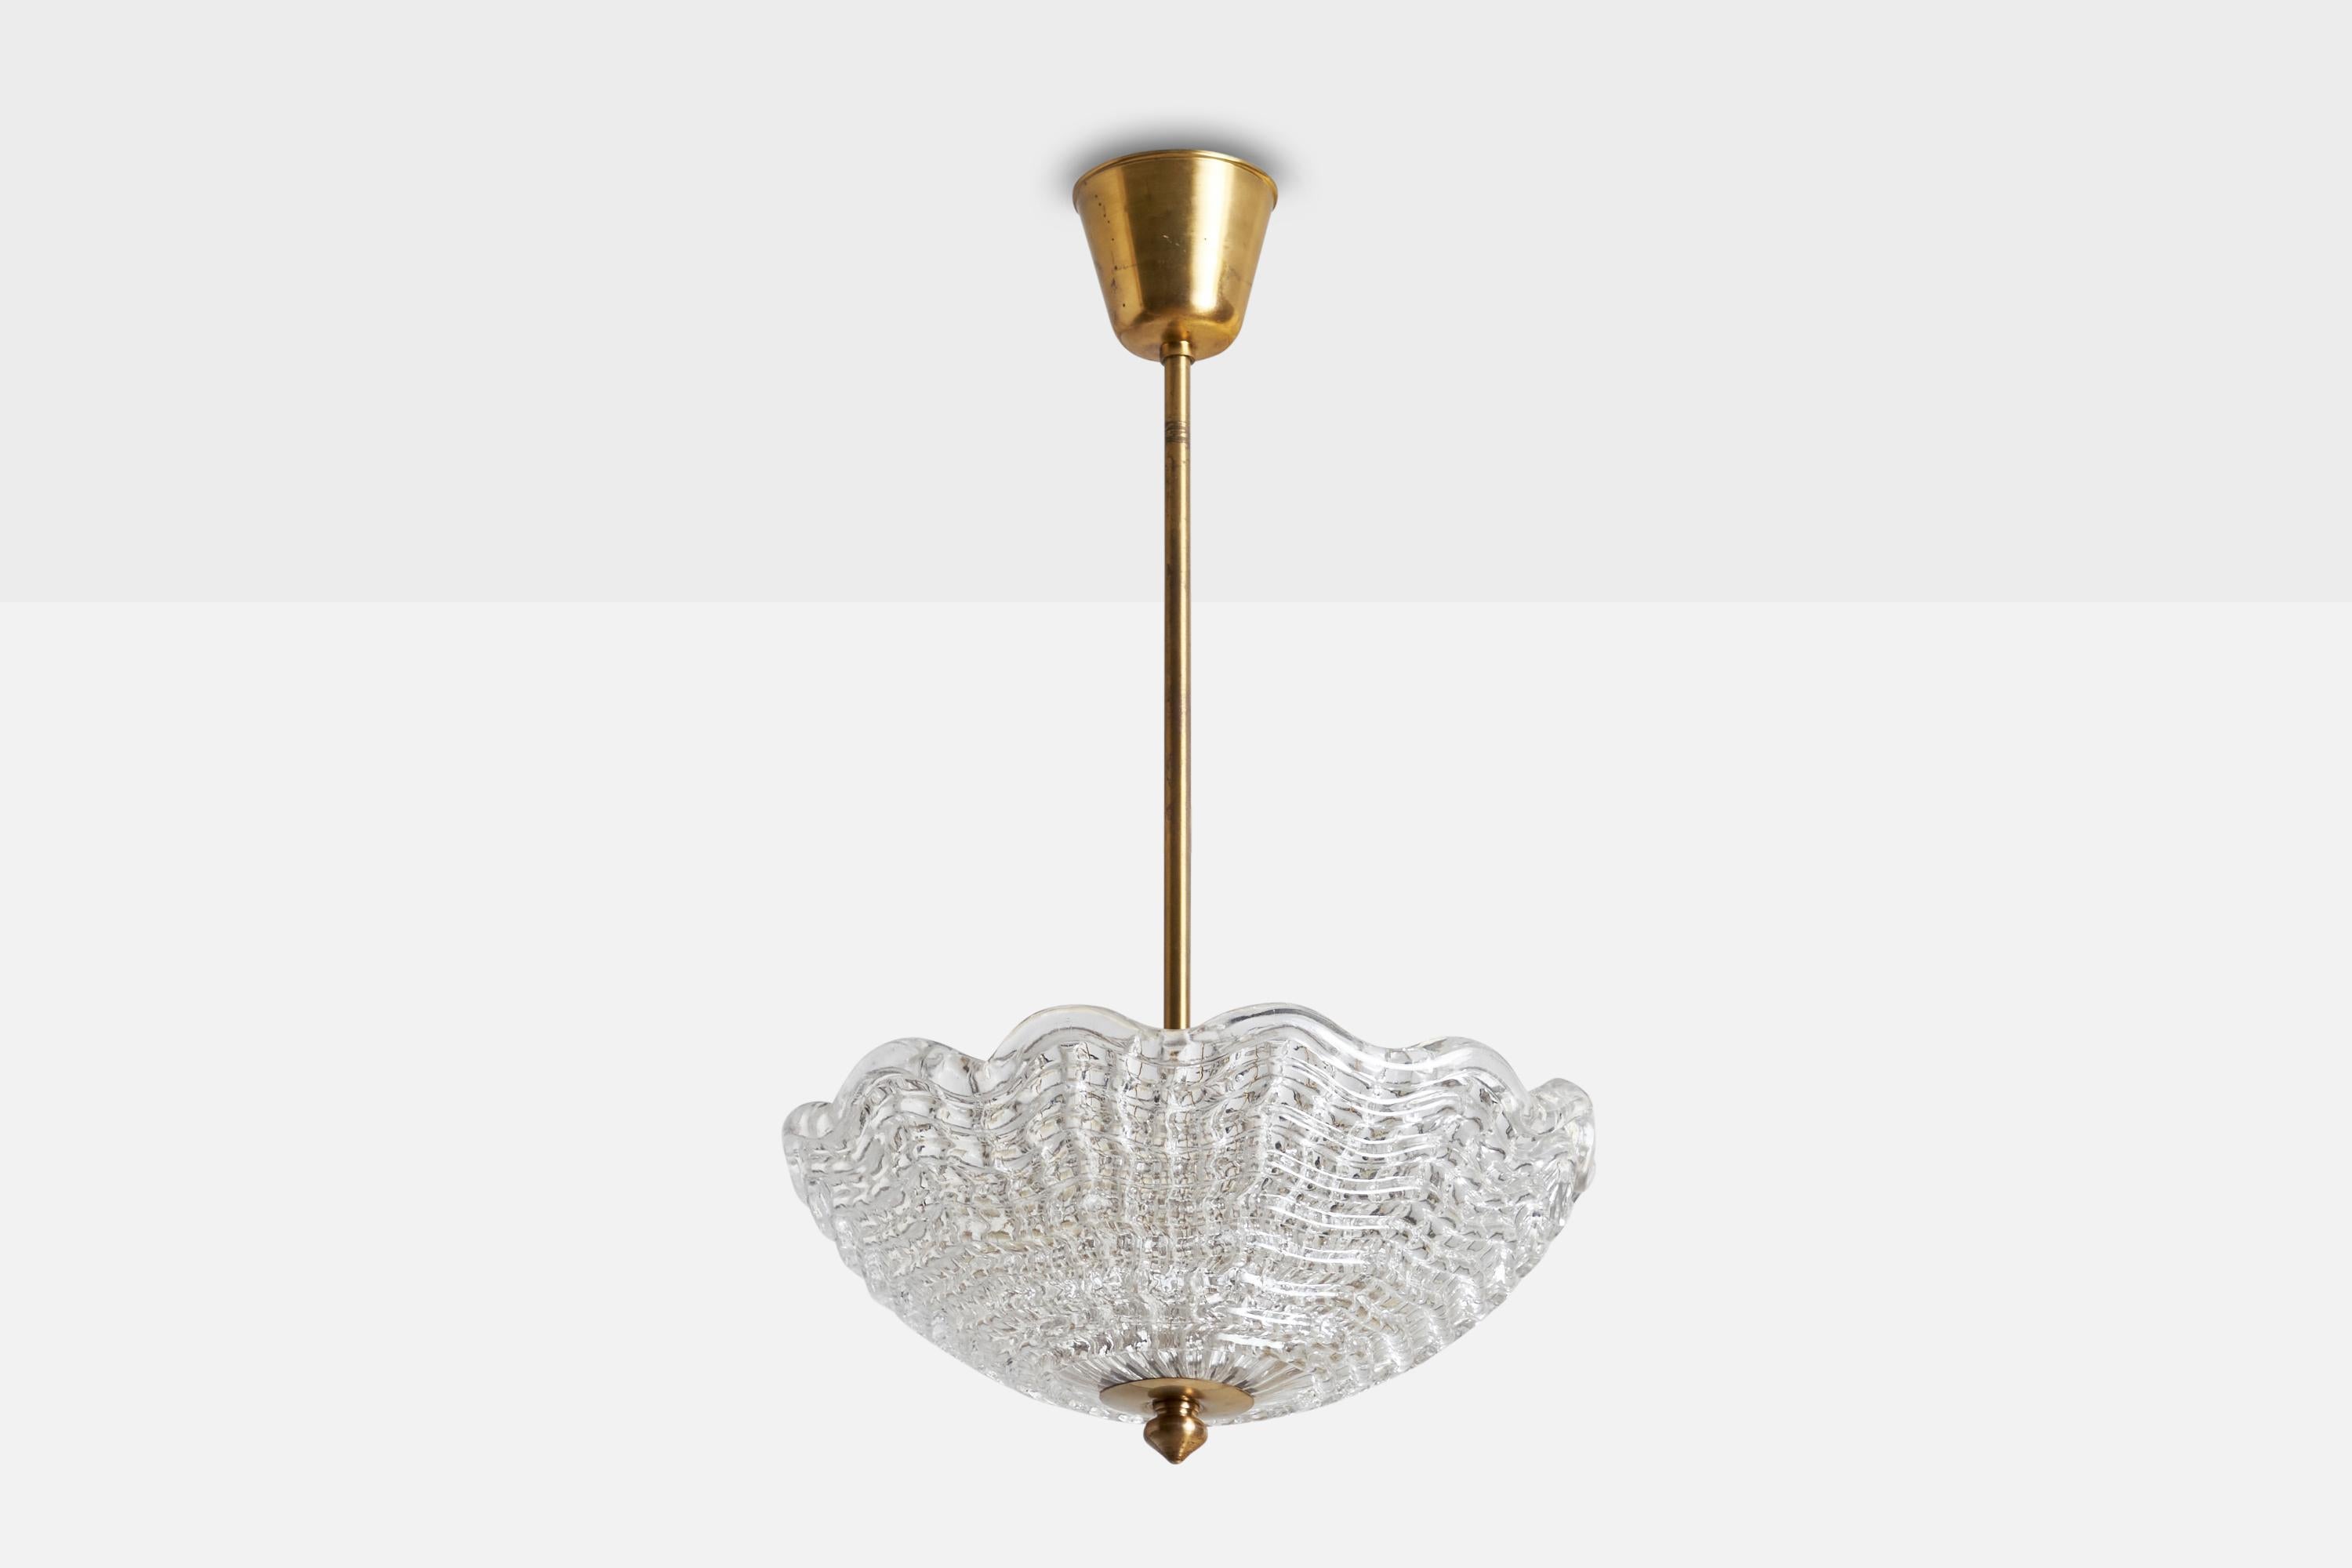 A brass and glass pendant light designed by Carl Fagerlund and produced by Orrefors, Sweden, c. 1950s.

Dimensions of canopy (inches): 3.25” H x 3.75” Diameter
Socket takes standard E-26 bulbs. 3 sockets.There is no maximum wattage stated on the